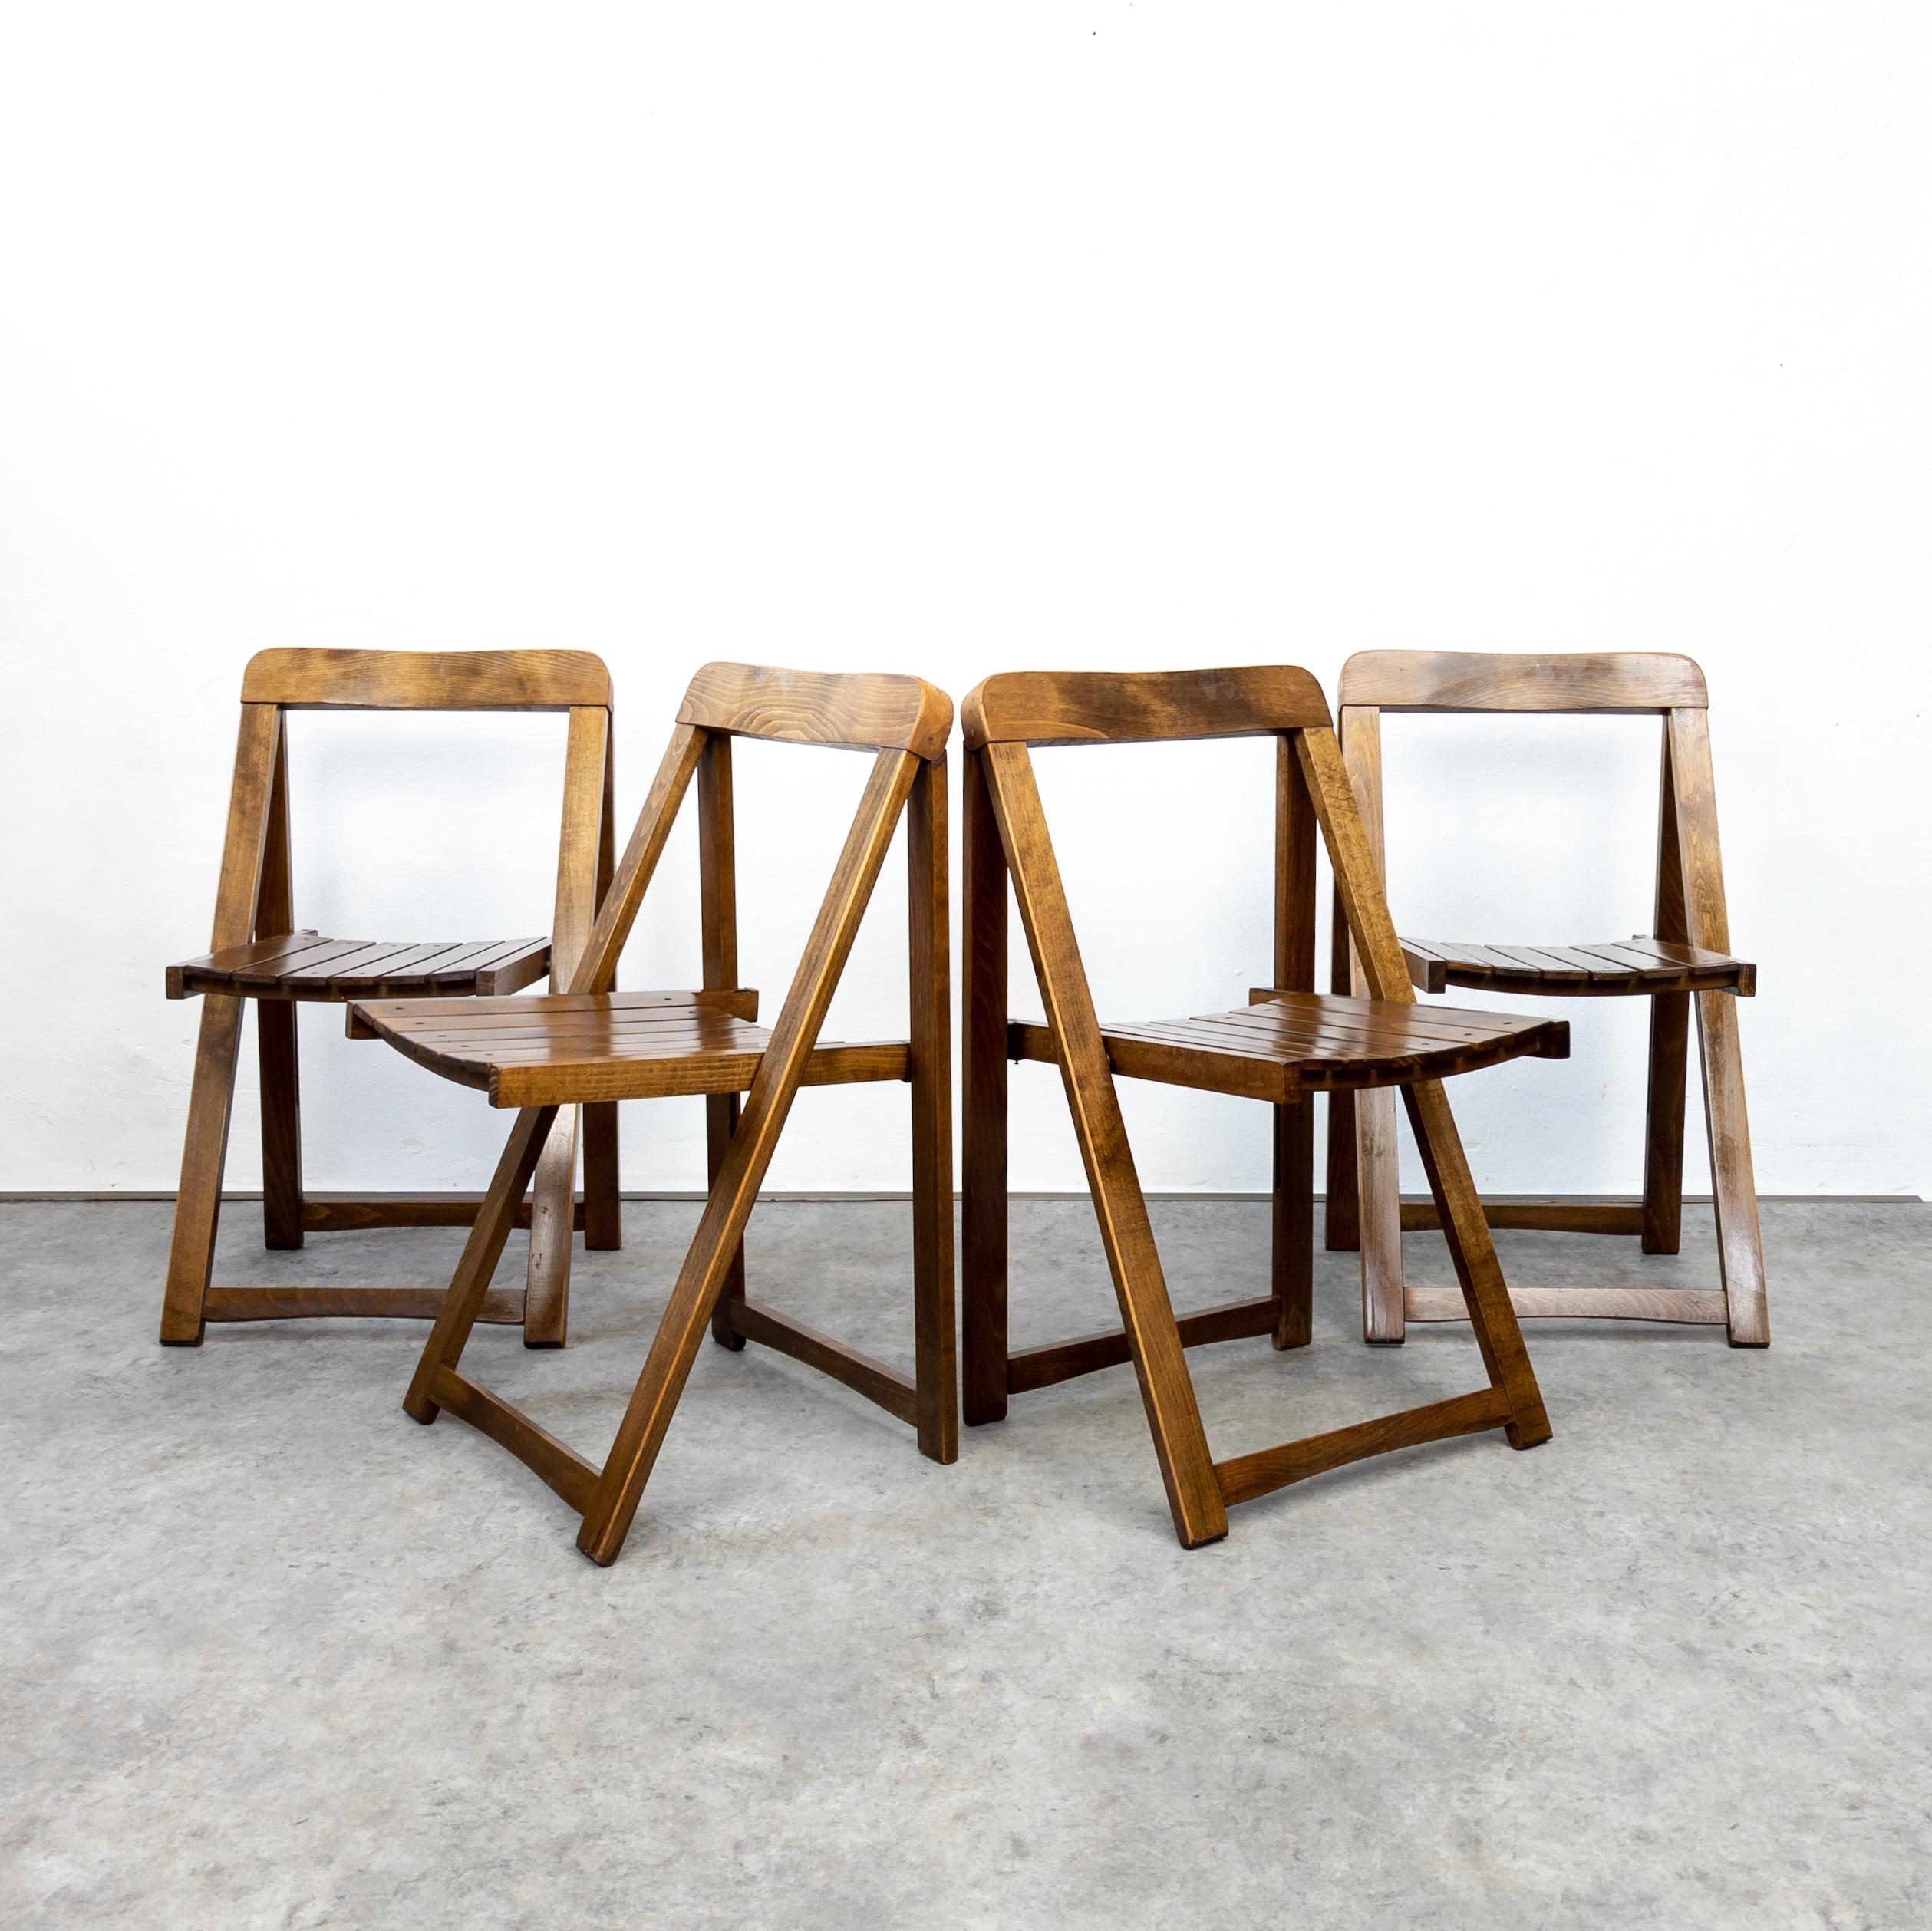 Set of four folding chairs in beech wood. In very good original condition with some traces of wear and age. Beautiful patina. Structurally sound.